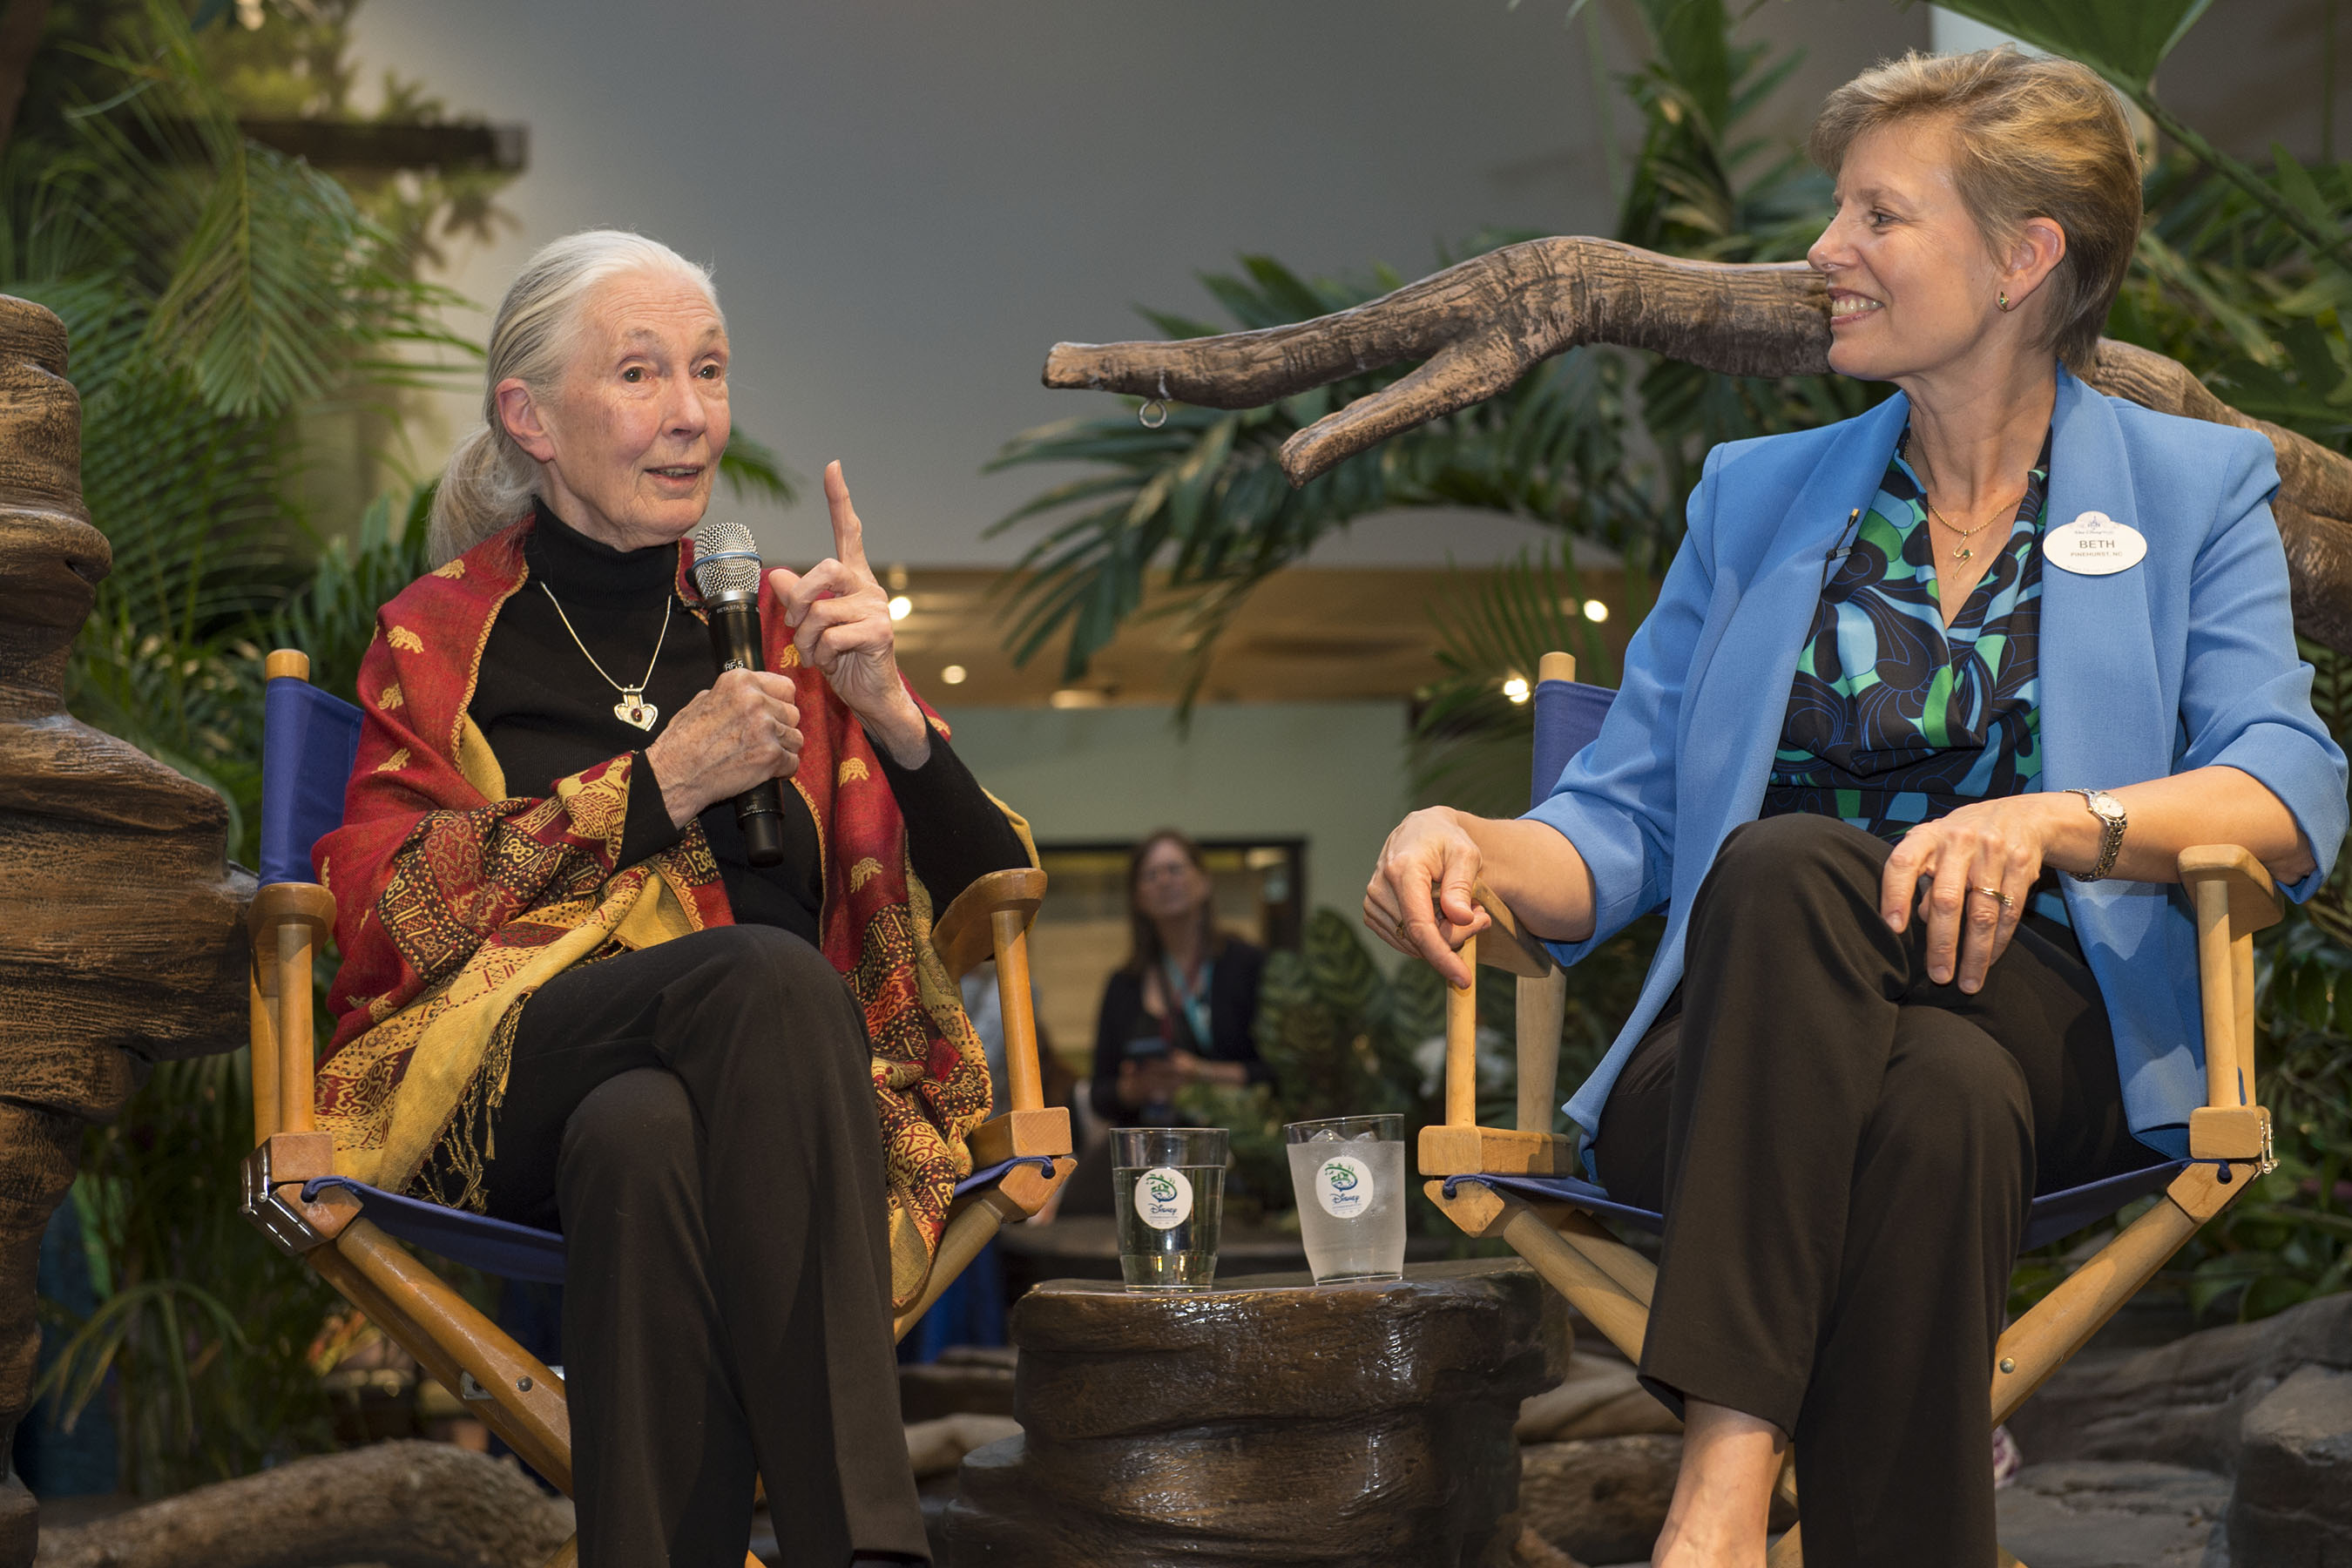 Dr. Jane Goodall talks with Dr. Beth Stevens, senior vice president, environment and conservation, corporate citizenship for the Walt Disney Company on April 19, 2016 at Disney's Animal Kingdom. Dr. Goodall and Dr. Stevens visited Disney's Animal Kingdom to celebrate the 20th anniversary of the Disney Conservation Fund and support the launch of its new initiative called "Reverse the Decline, Increase the Time" which aims to reverse the decline of threatened species through scientific research and increasing the time kids spend in nature. (David Roark, photographer)